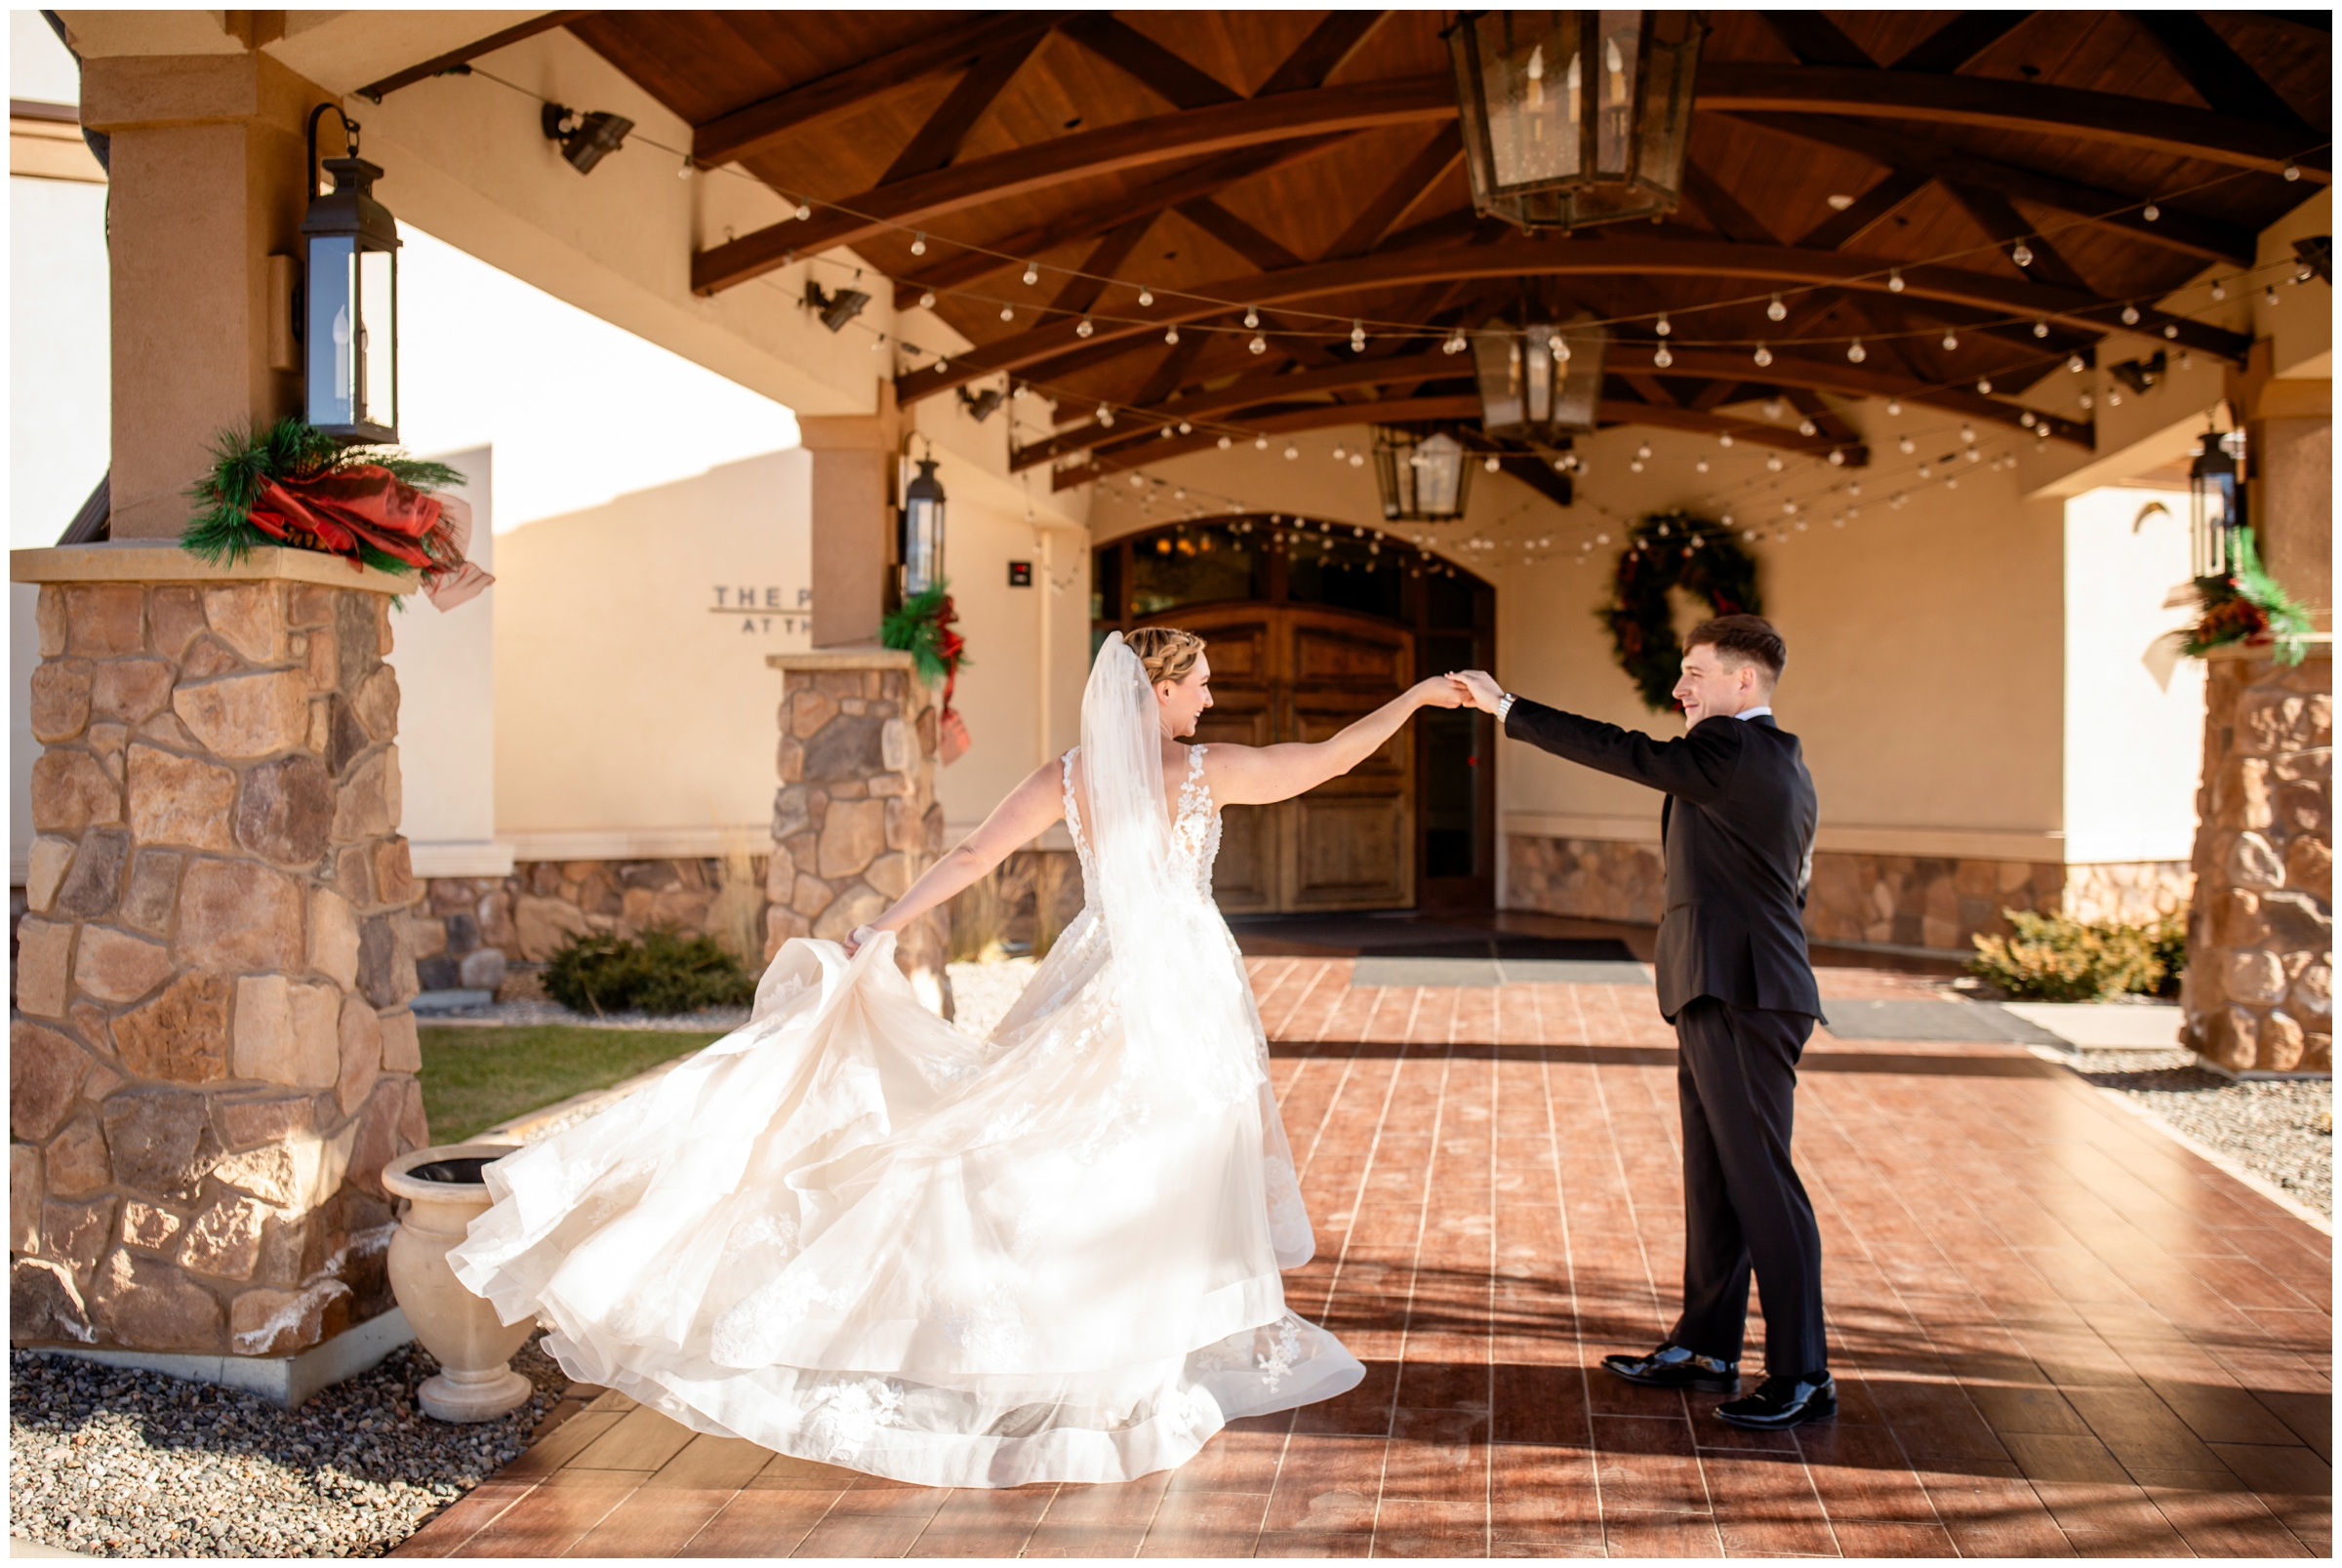 groom spinning bride during winter wedding photos at the Pinery in Colorado Springs